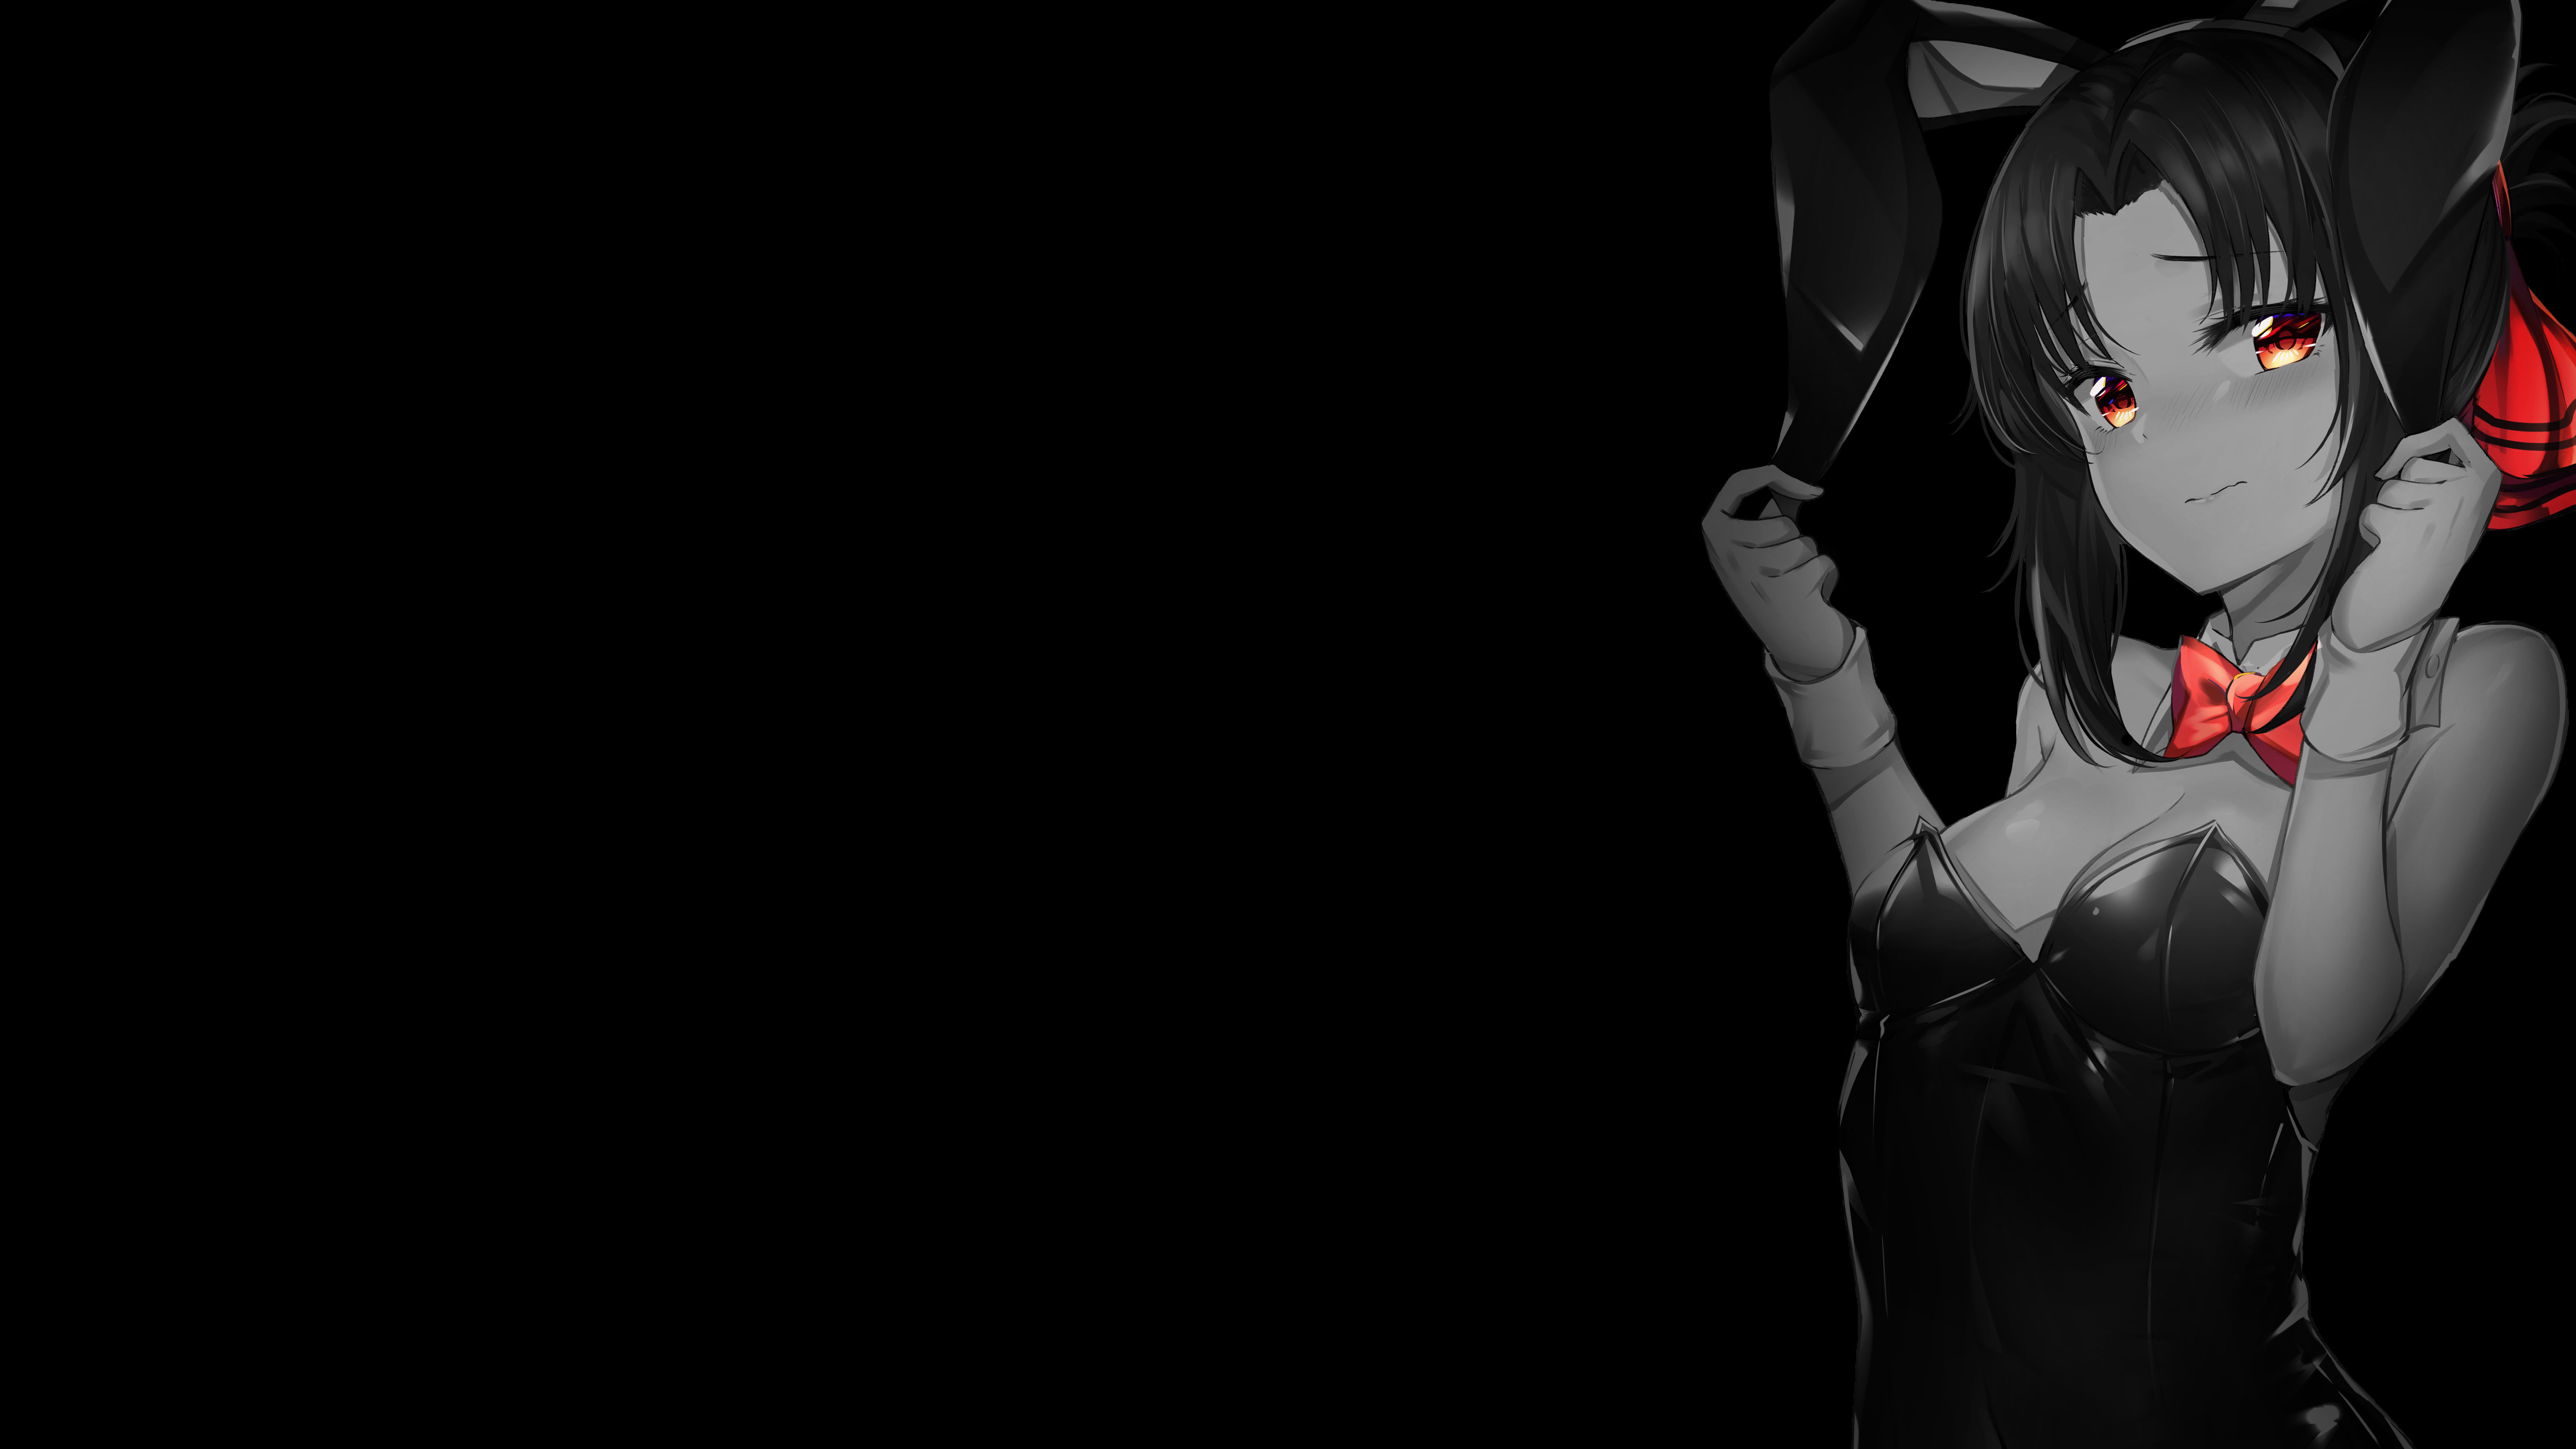 Anime 6144x3456 selective coloring black background dark background simple background anime girls bunny suit bunny ears